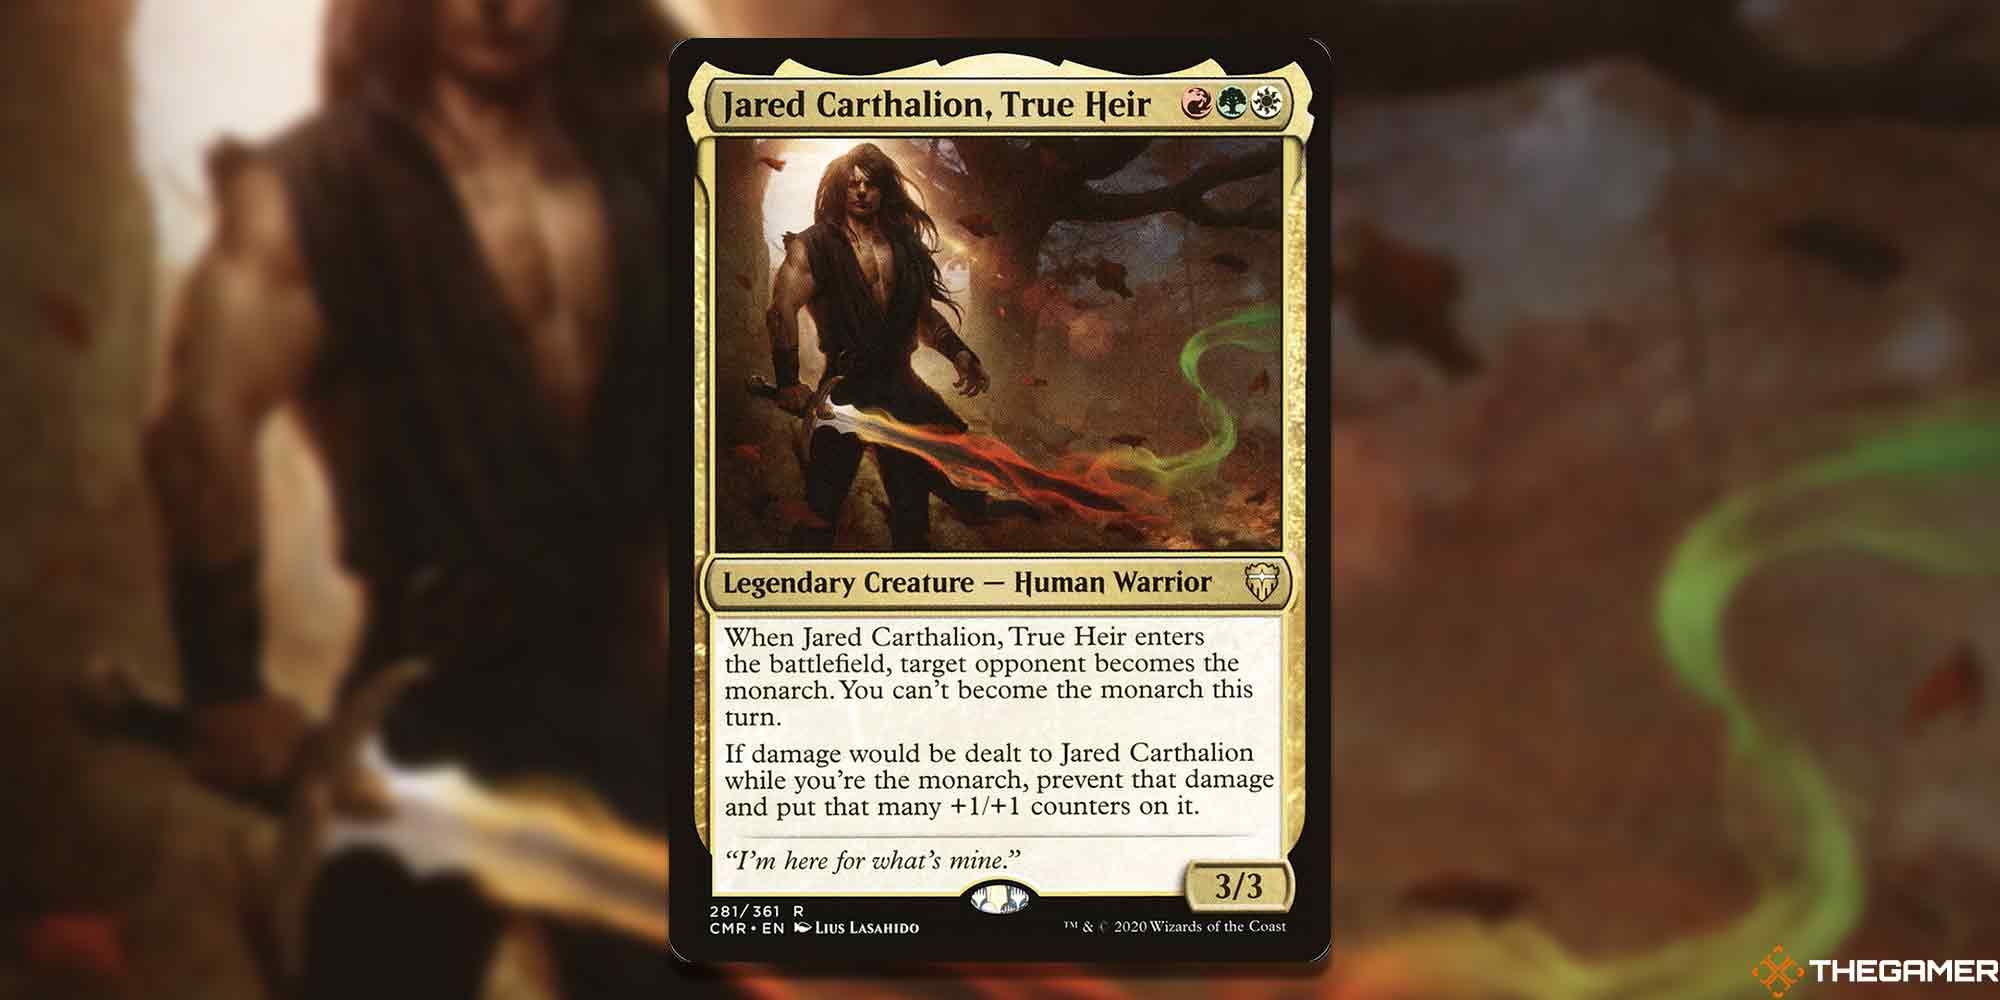 Image of the Jared Carthalion, True Heir card in Magic: The Gathering, with art by Lius Lasahido